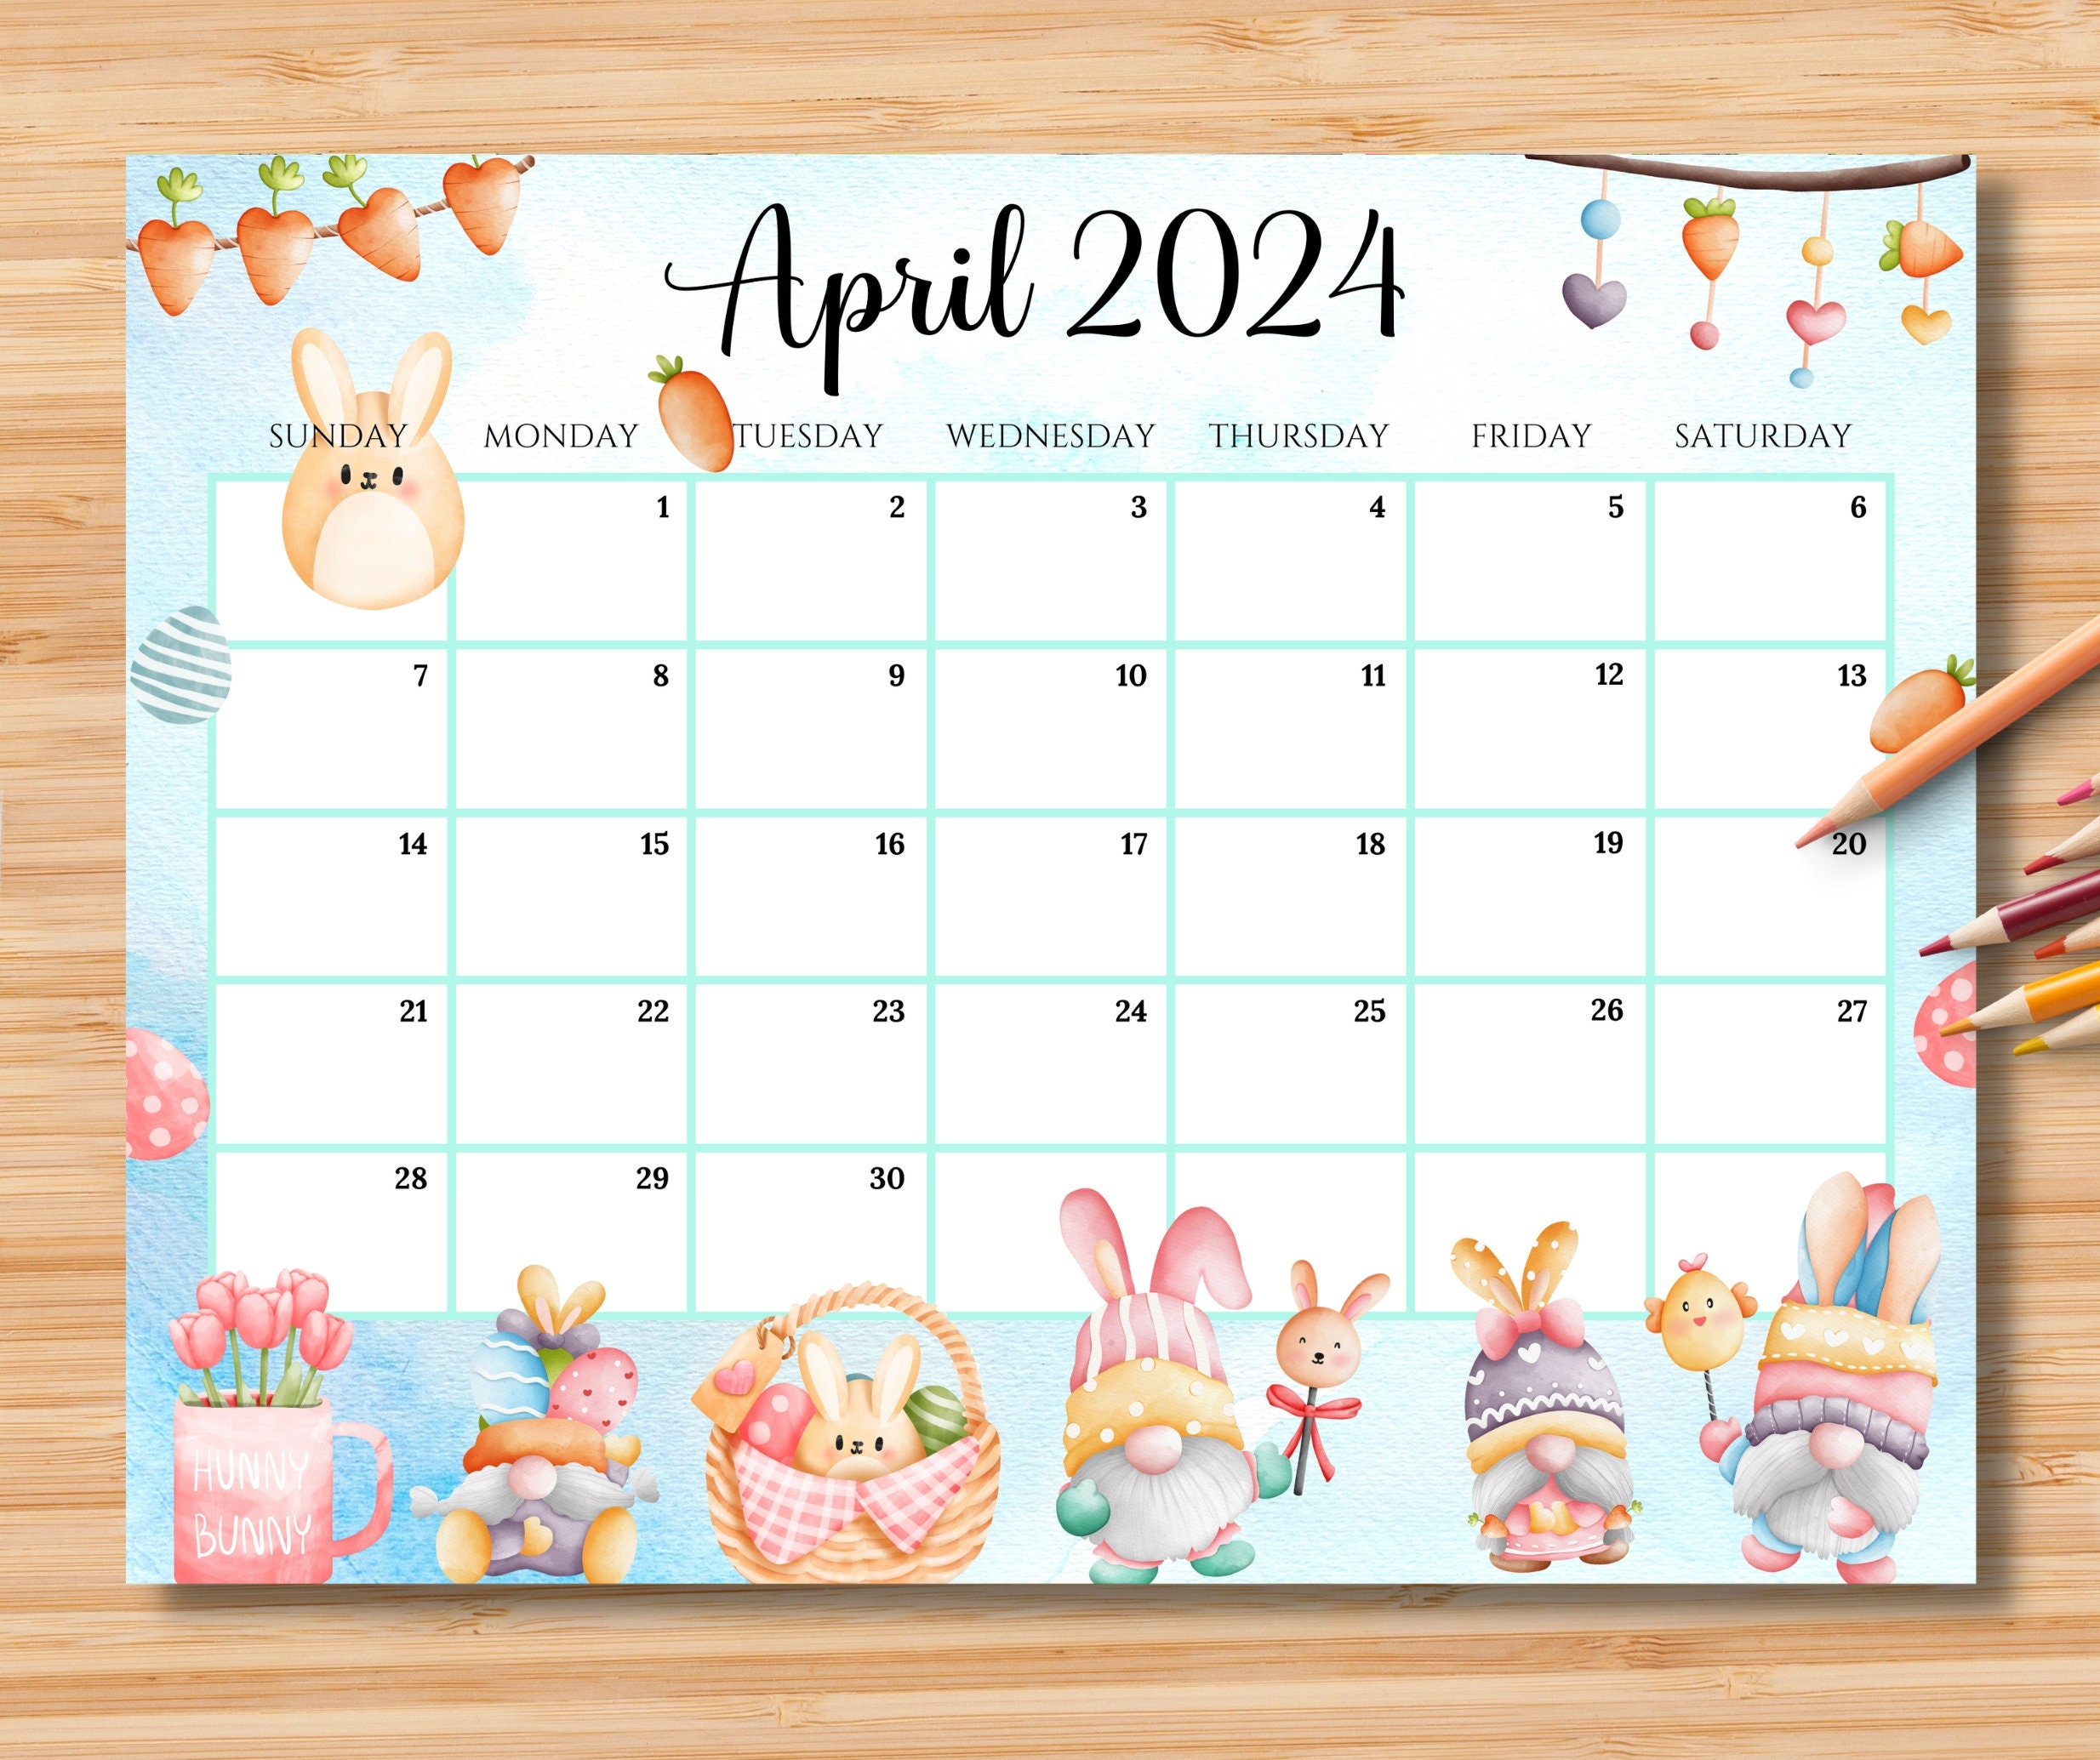 Editable April 2024 Calendar, Happy Easter Day With Cute Gnomes intended for Editable April 2024 Calendar